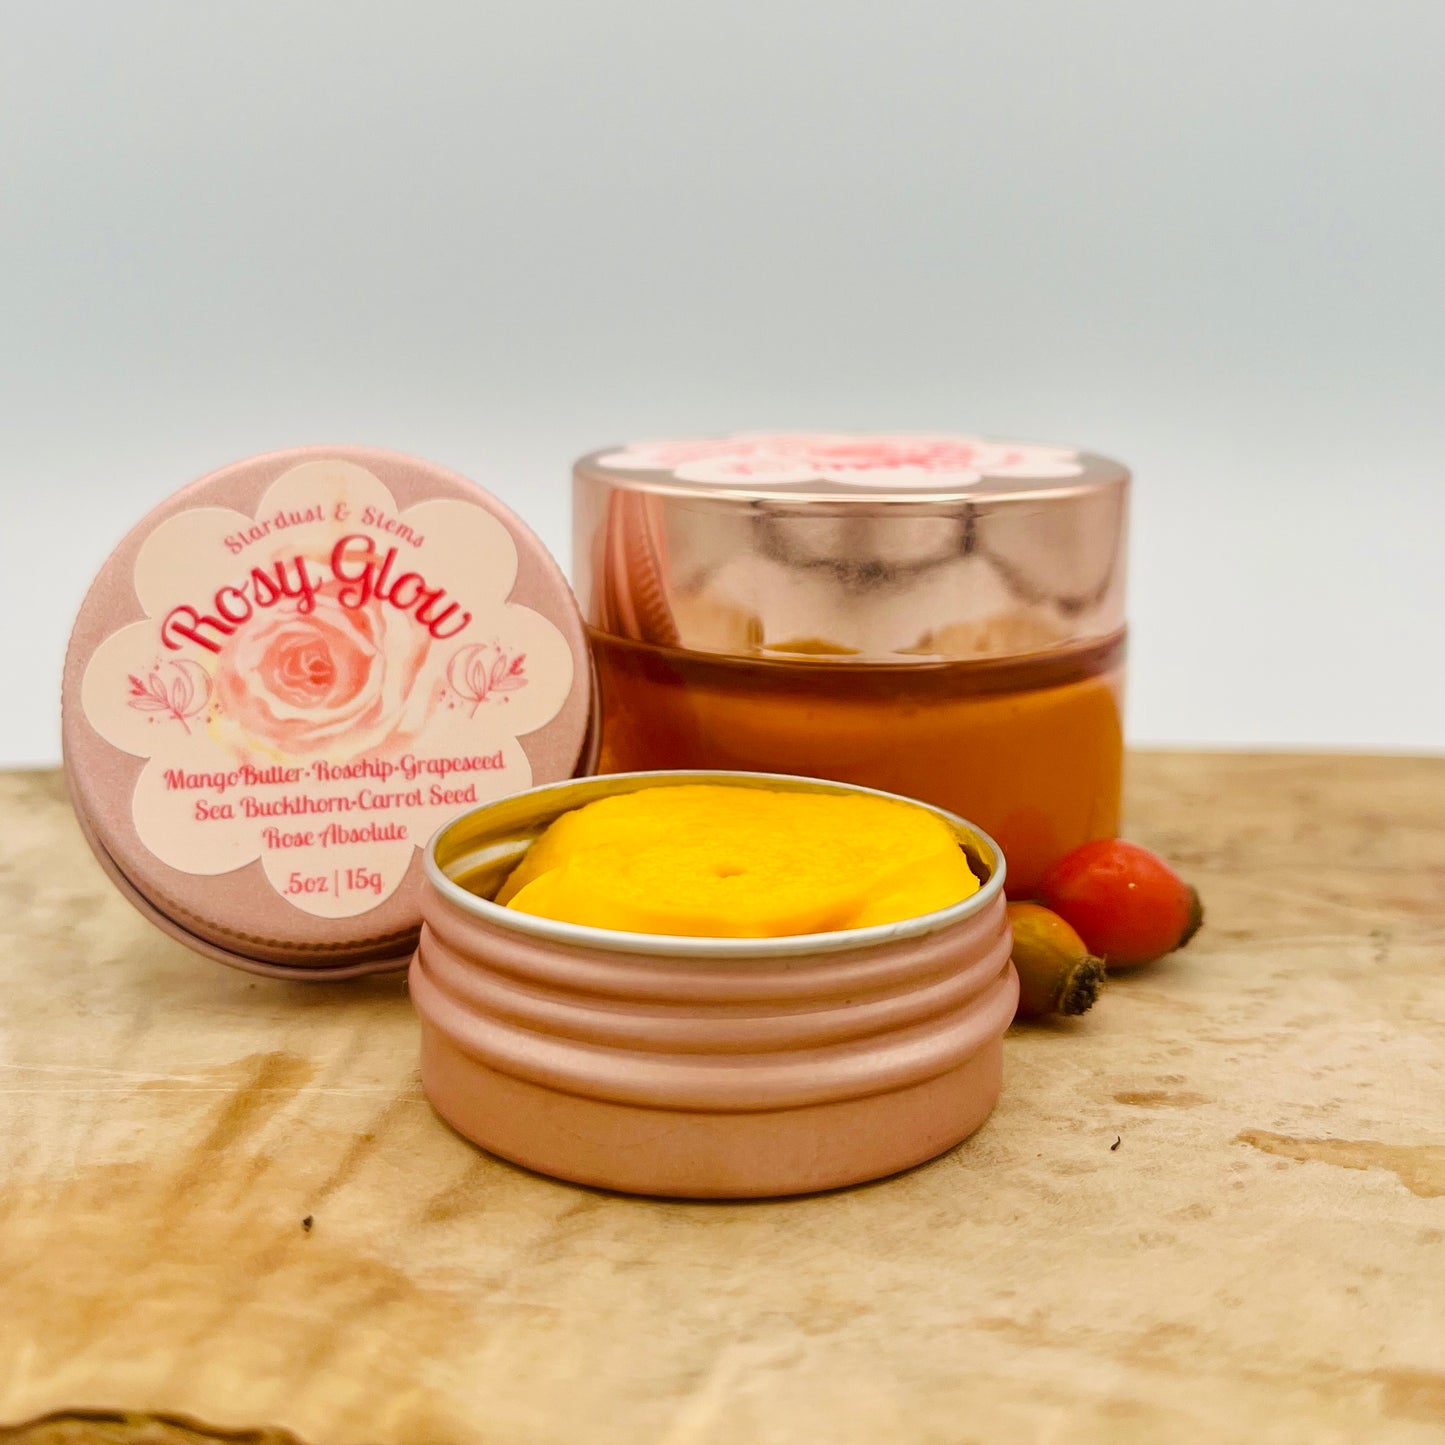 Rosy Glow Face Moisture Cream, Rich Velvety Emulsion with Organic Rosehip Seed C02 Extract, Mango Butter for Clear and Radiant Glow